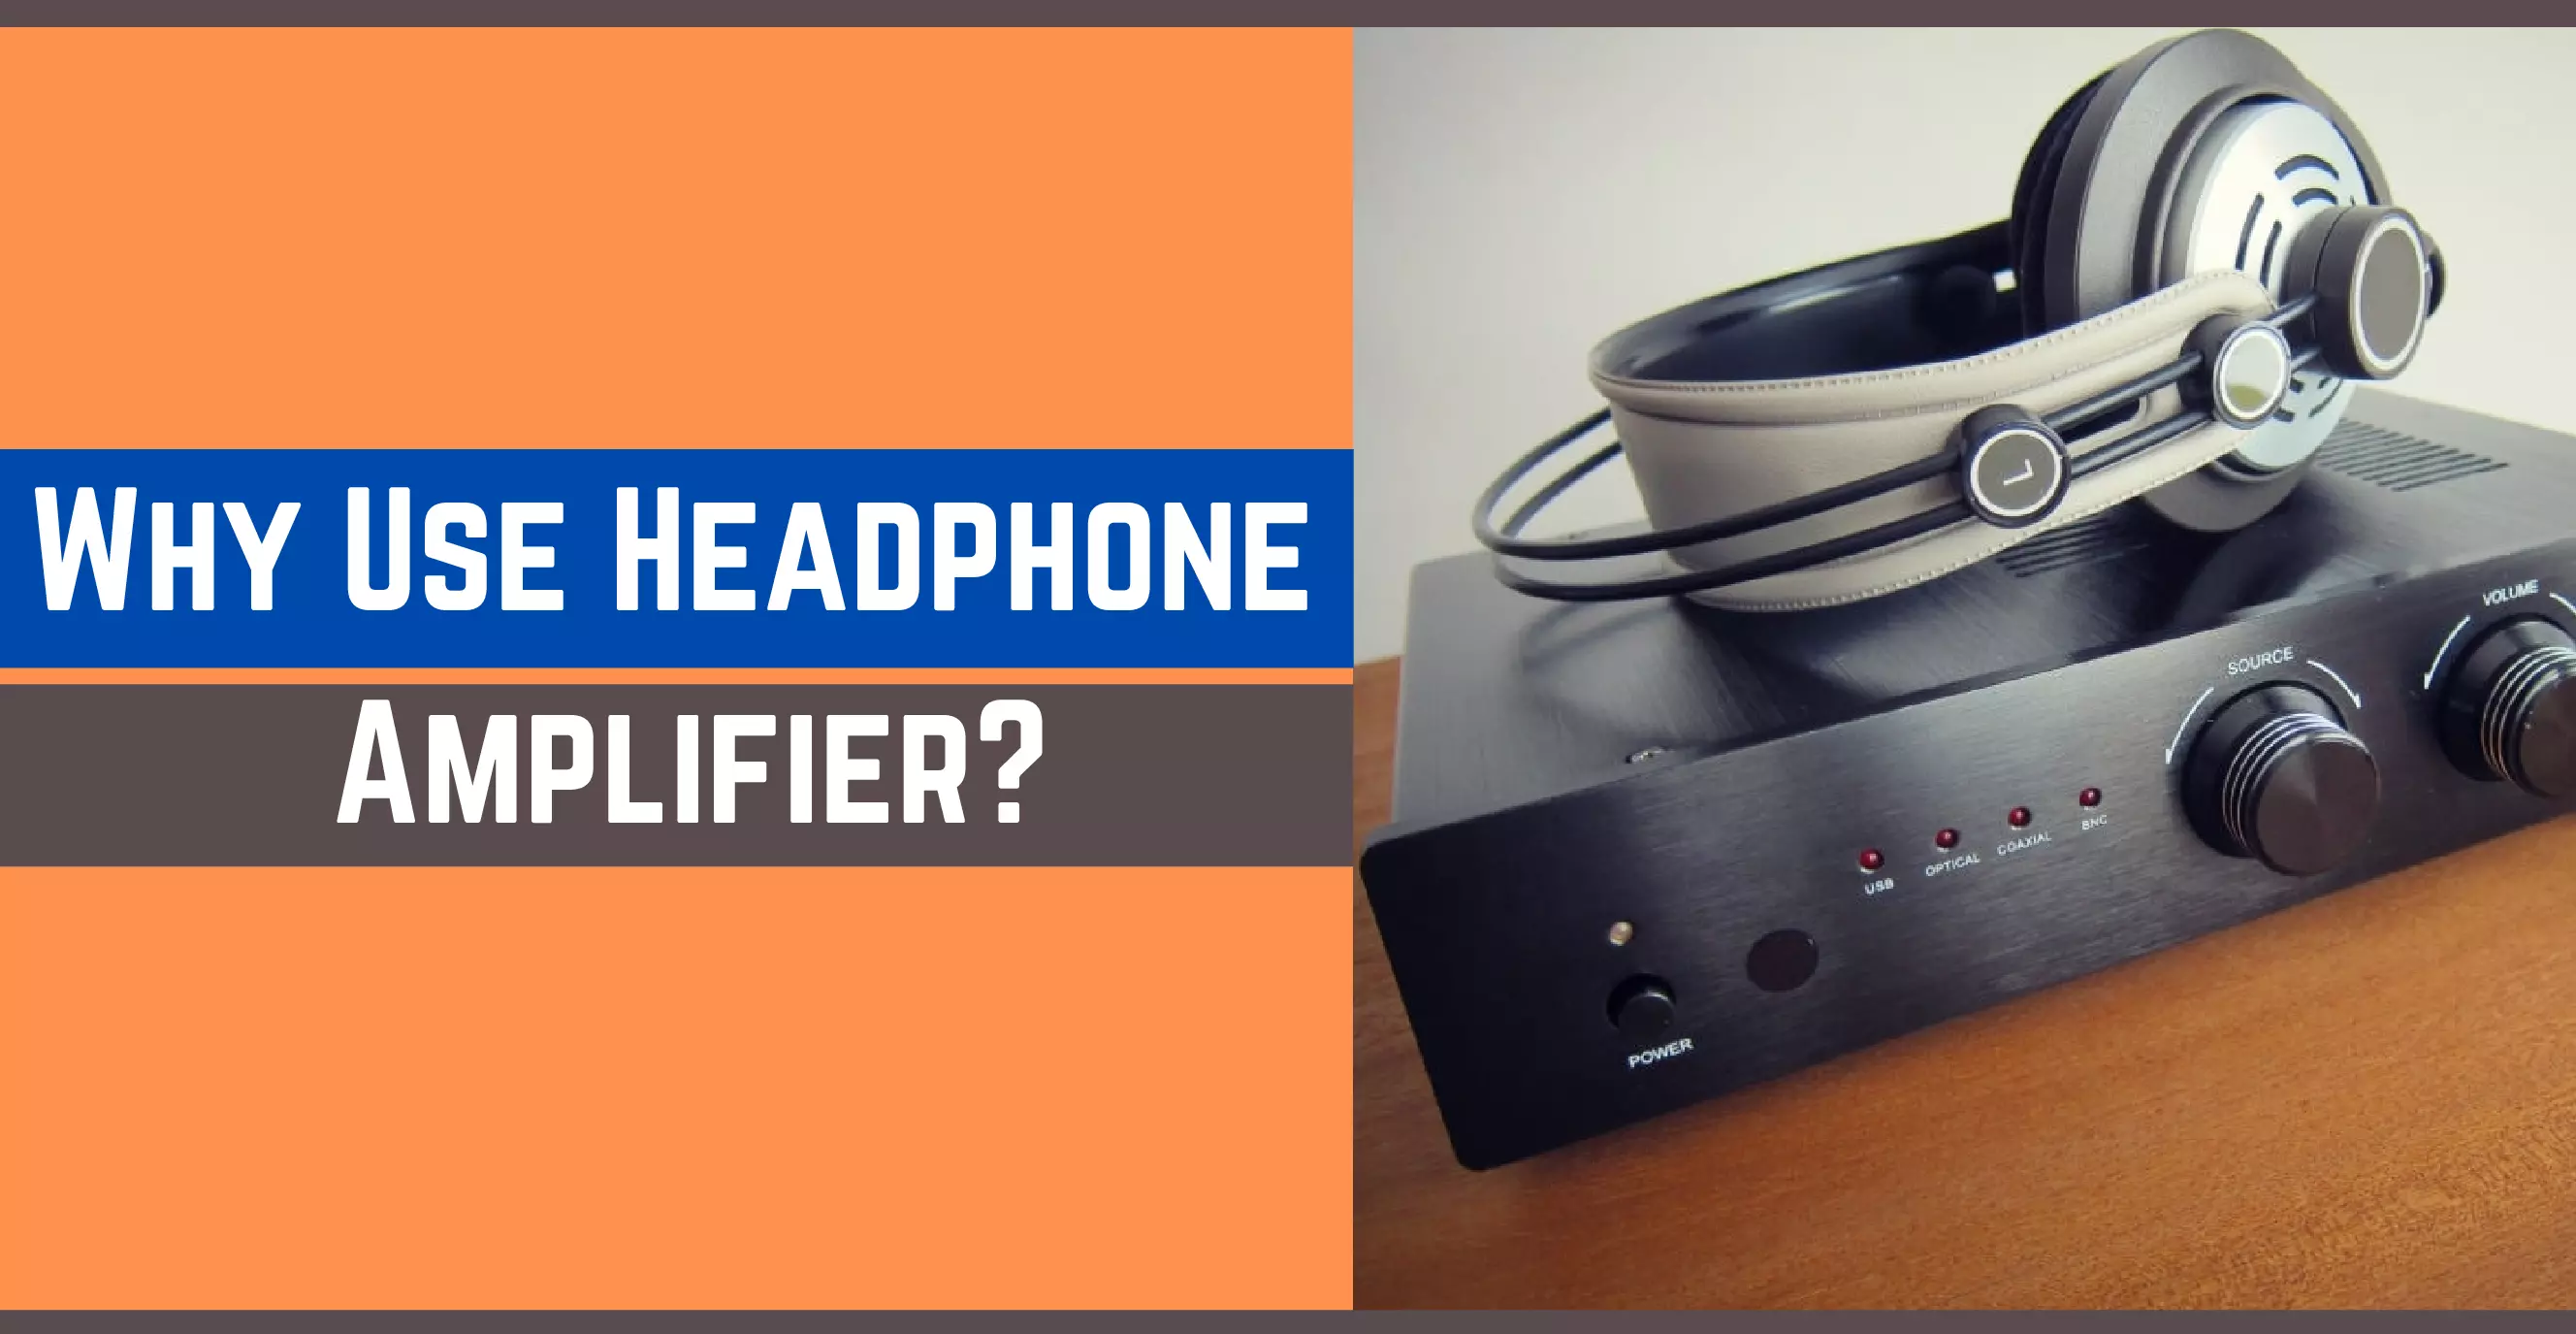 Why Use A Headphone Amplifier